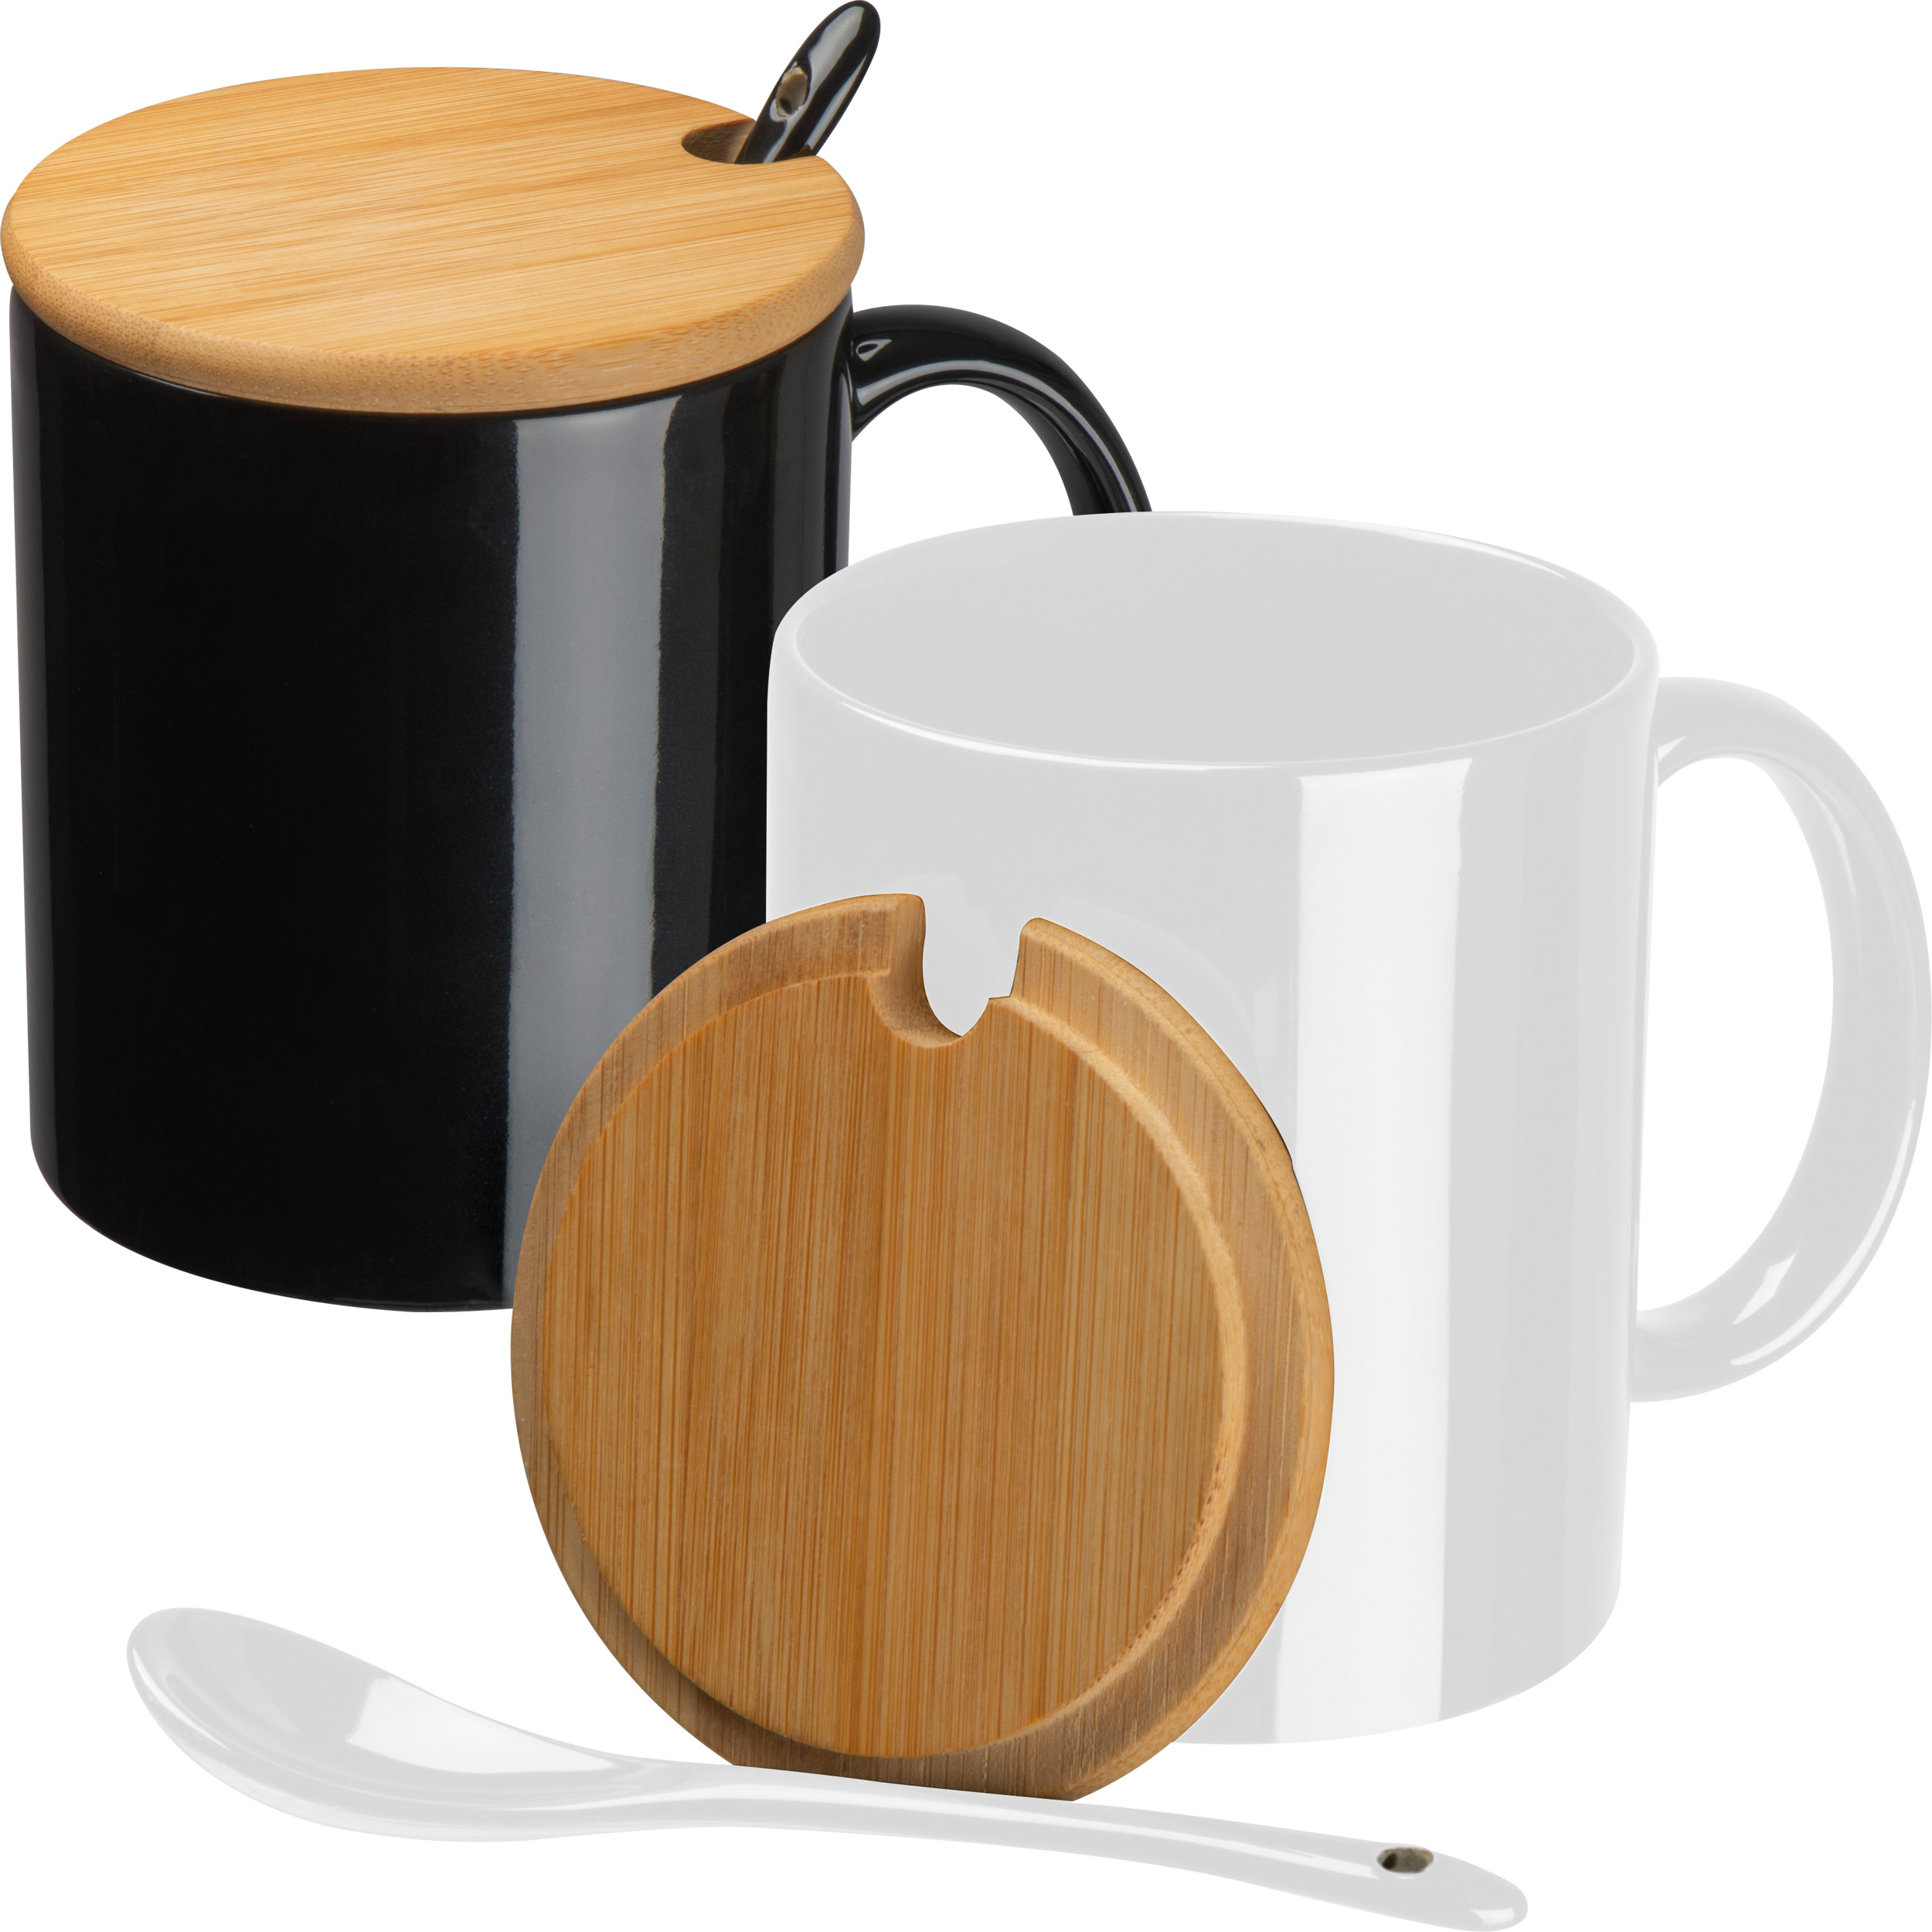 Ceramic mug with spoon and bamboo lid